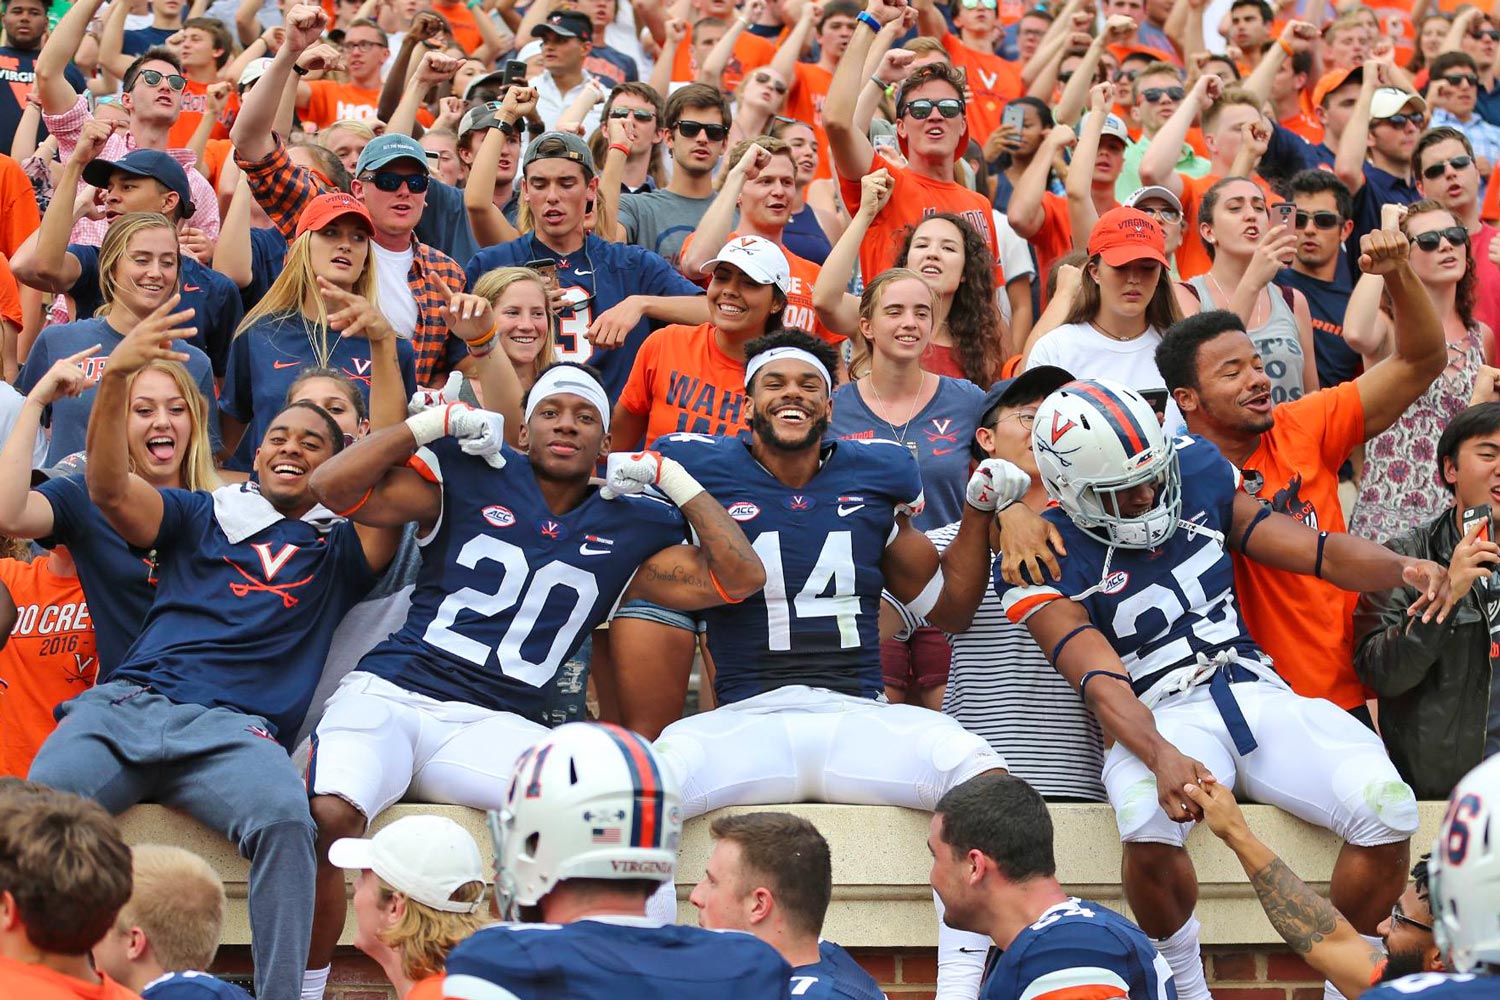 Football players sit on the wall with fans cheering behind them